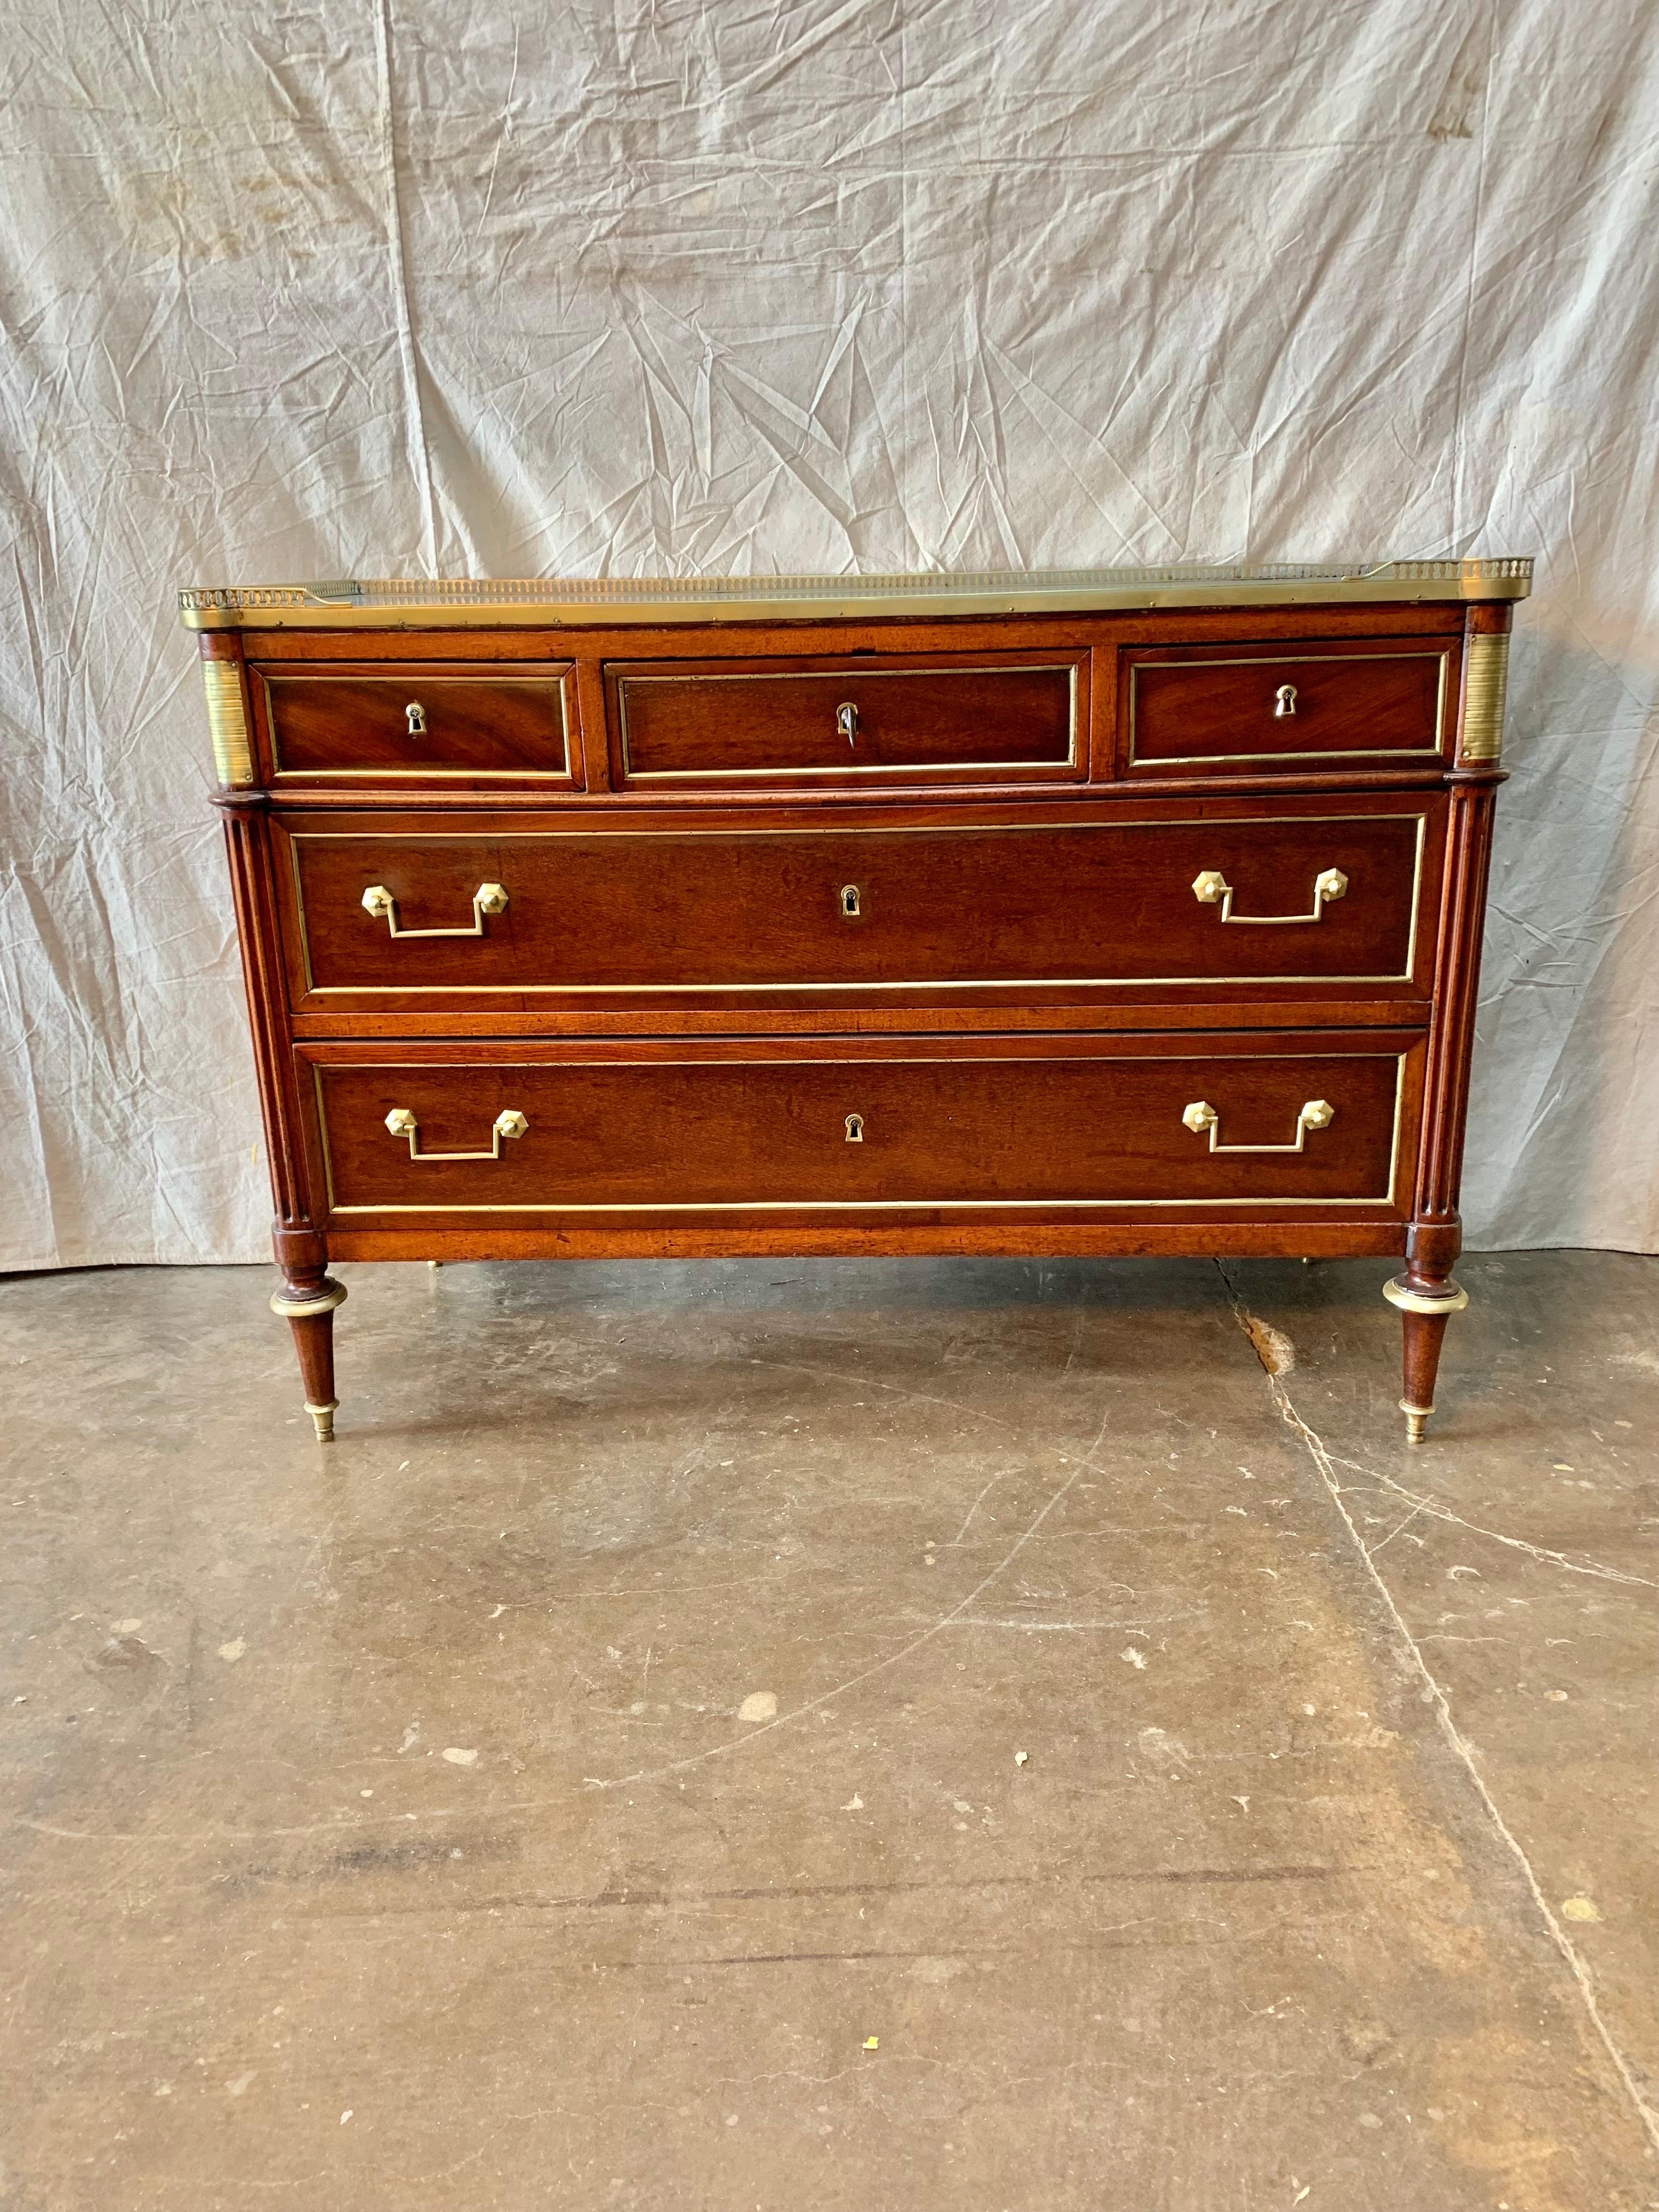 This 19th Century French Louis XVI Commode is made of mahogany and oak. The piece is crafted with a marble top and pierced brass gallery. The chest of drawers features five drawers on three rows, three small ones on the first row then two larger